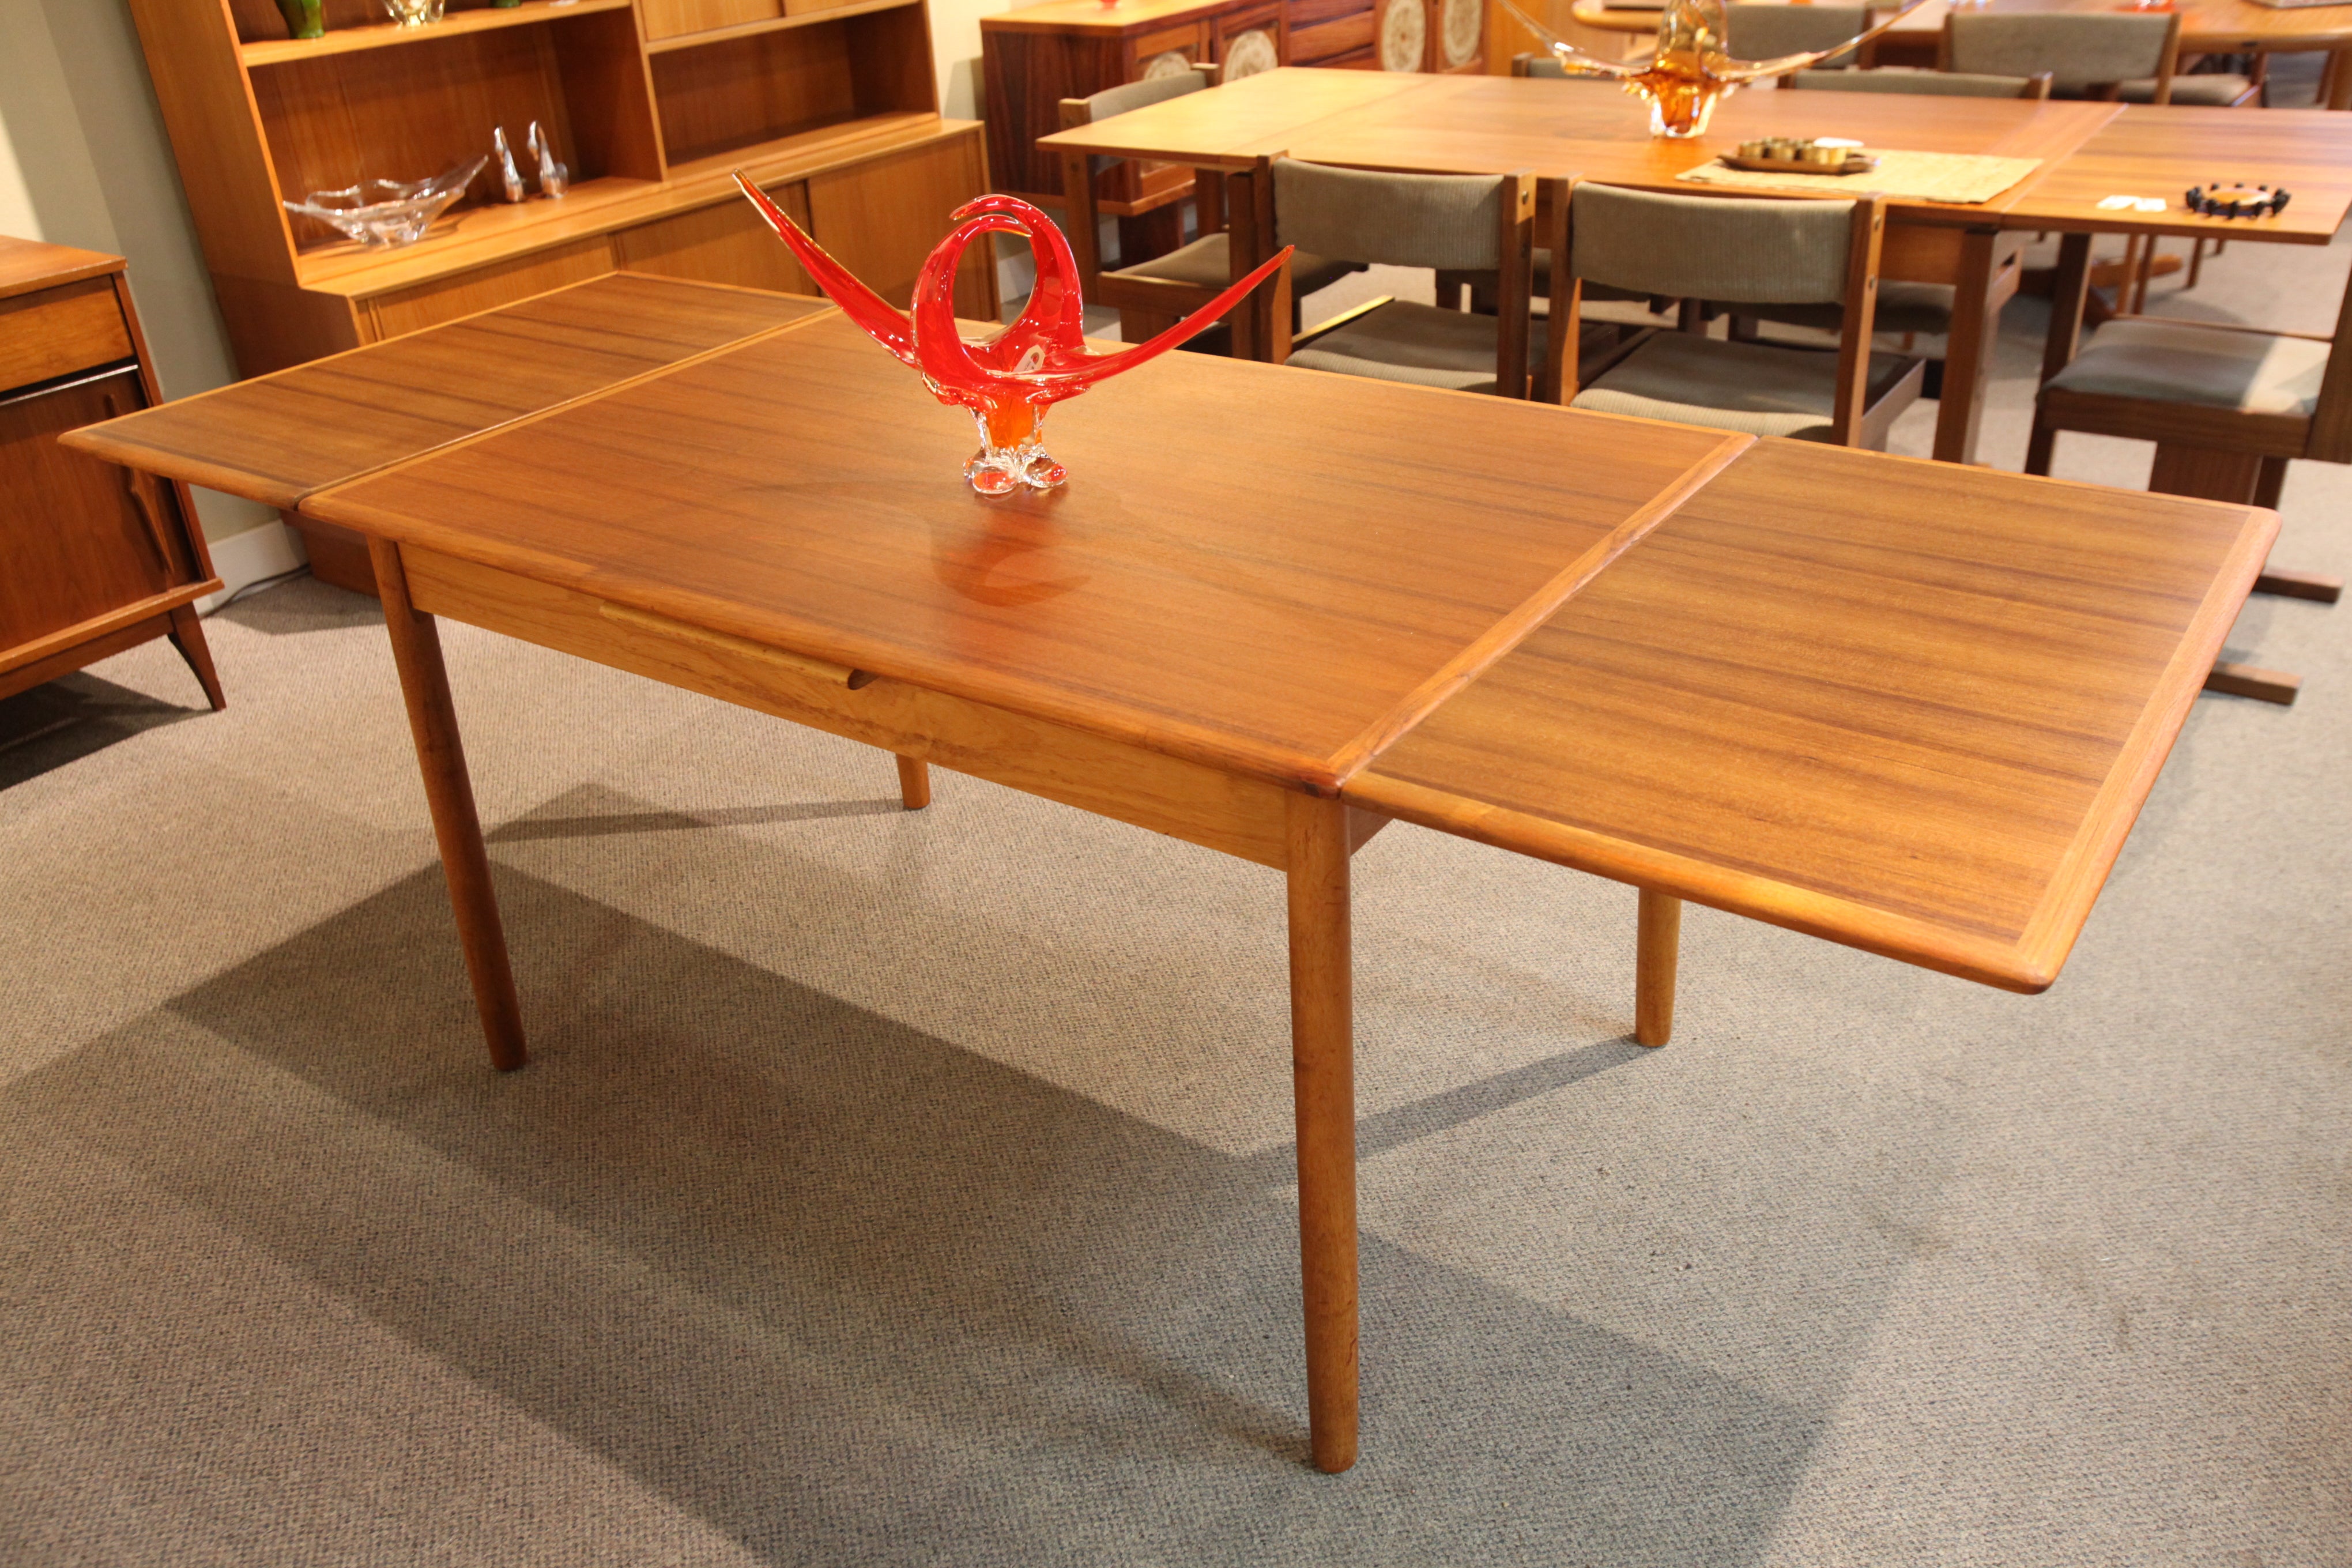 Vintage Danish Teak Extension Dining Table (49.5" x 33.5" x 29"H) or (86.5" x 33.5" x 29"H)